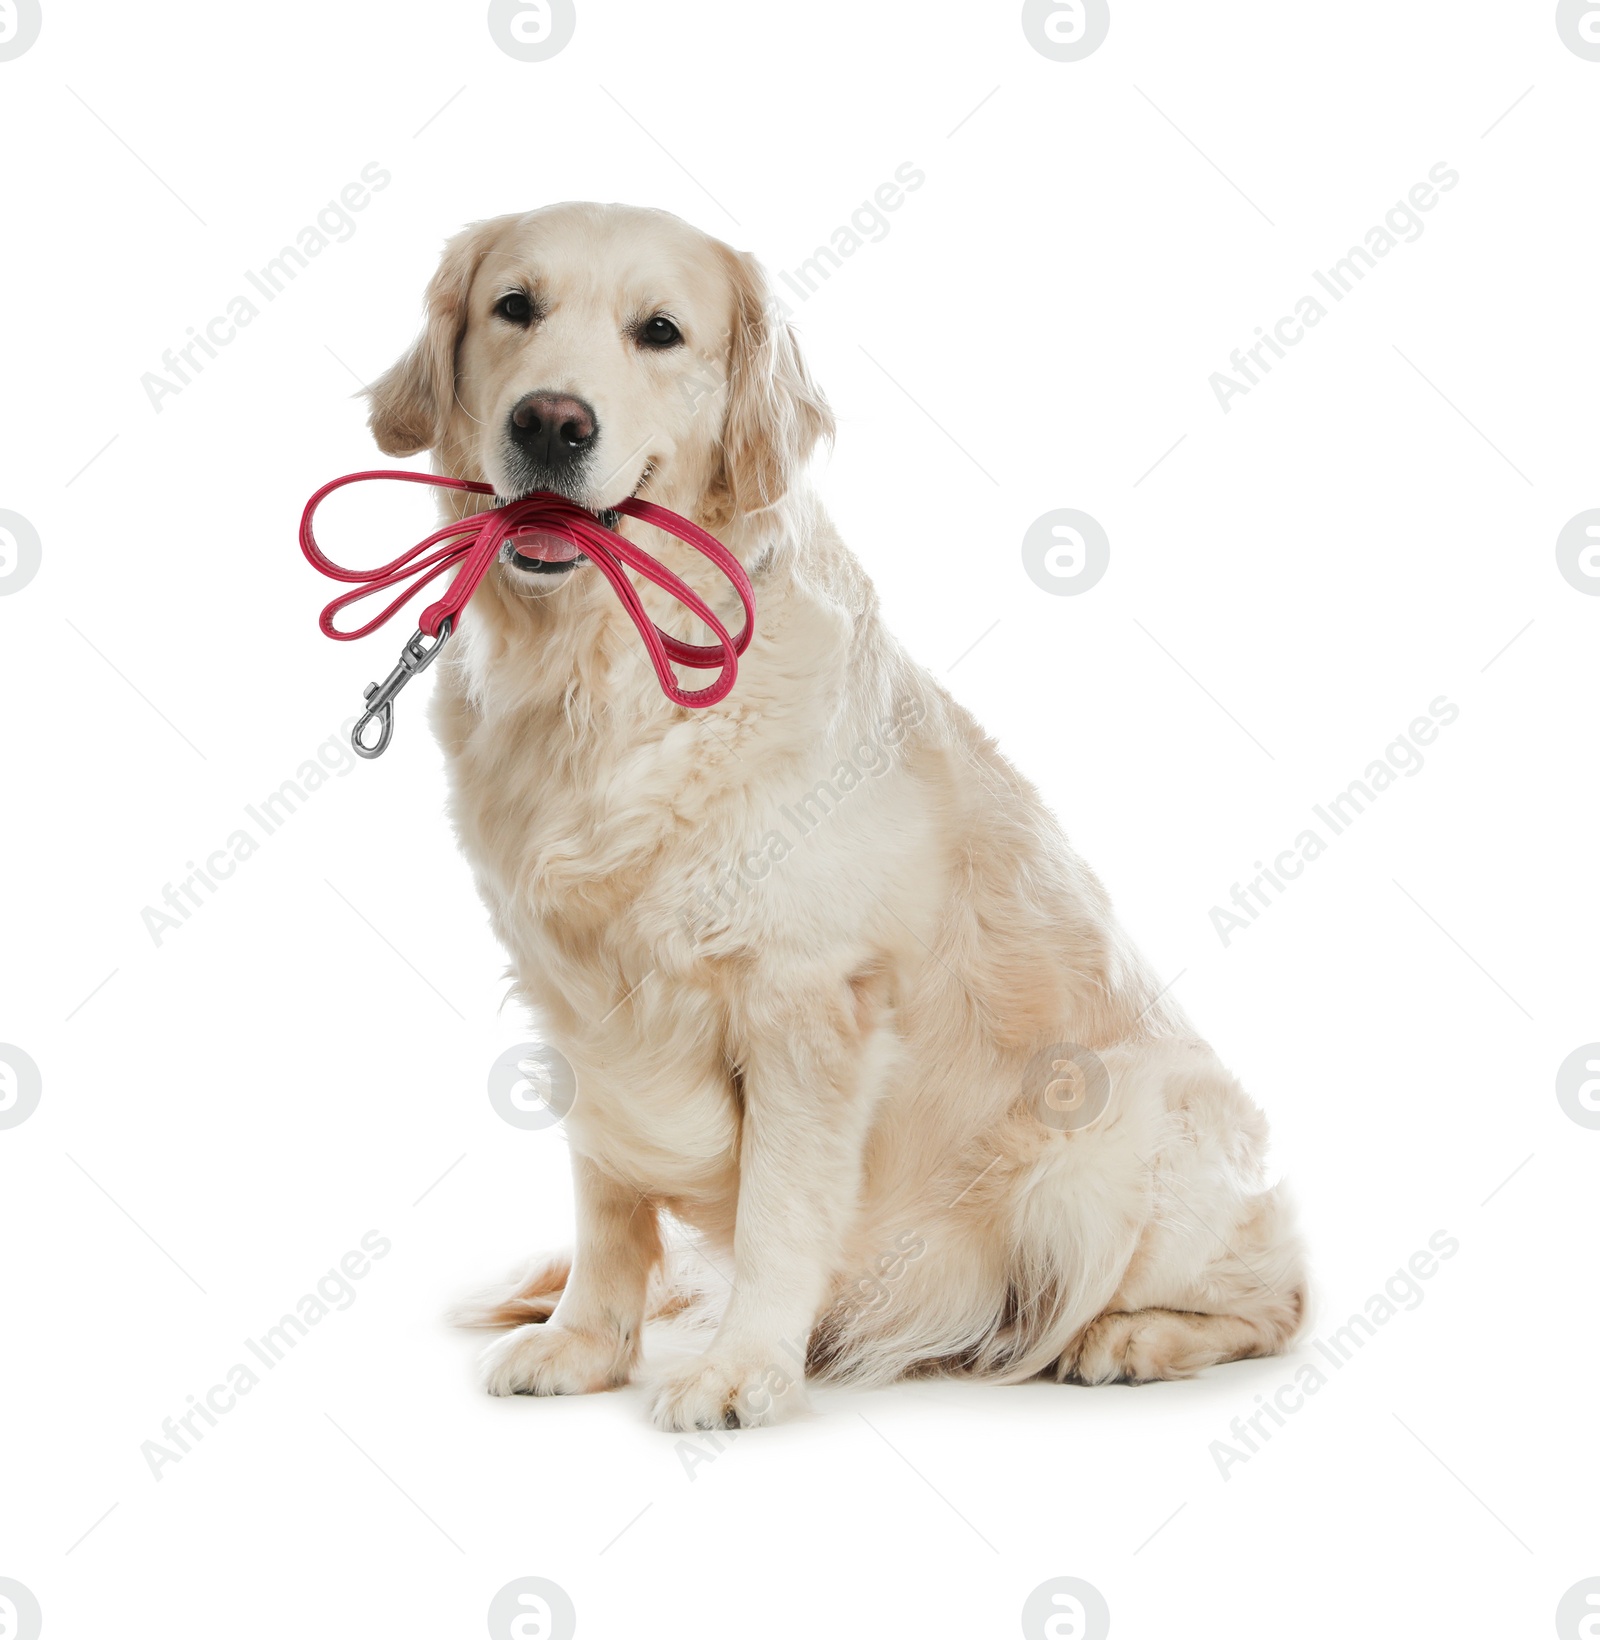 Image of Adorable Golden Retriever dog holding leash in mouth on white background